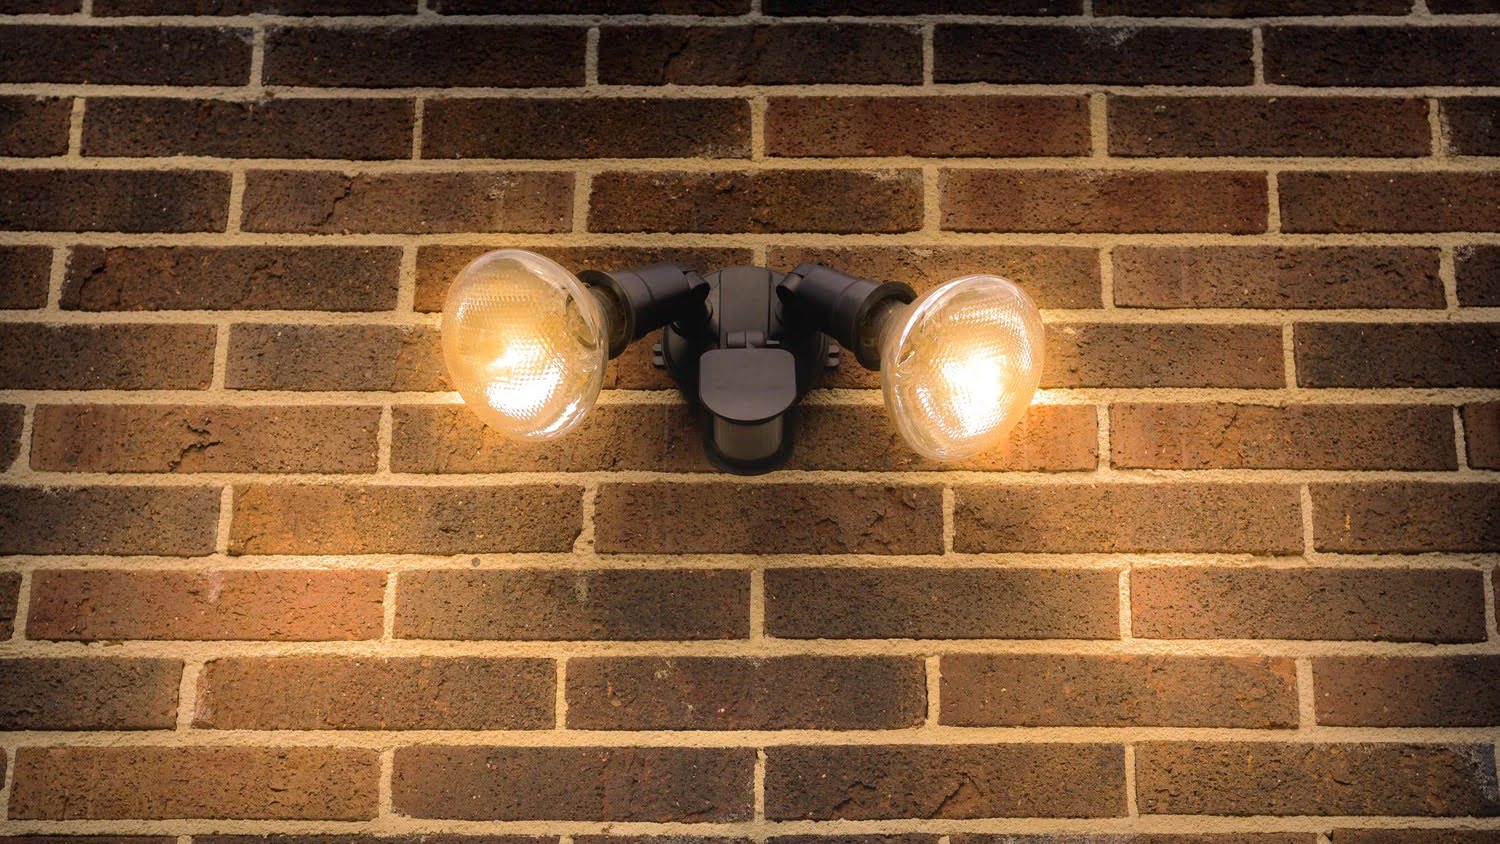 How To Keep The Motion Detector Light On